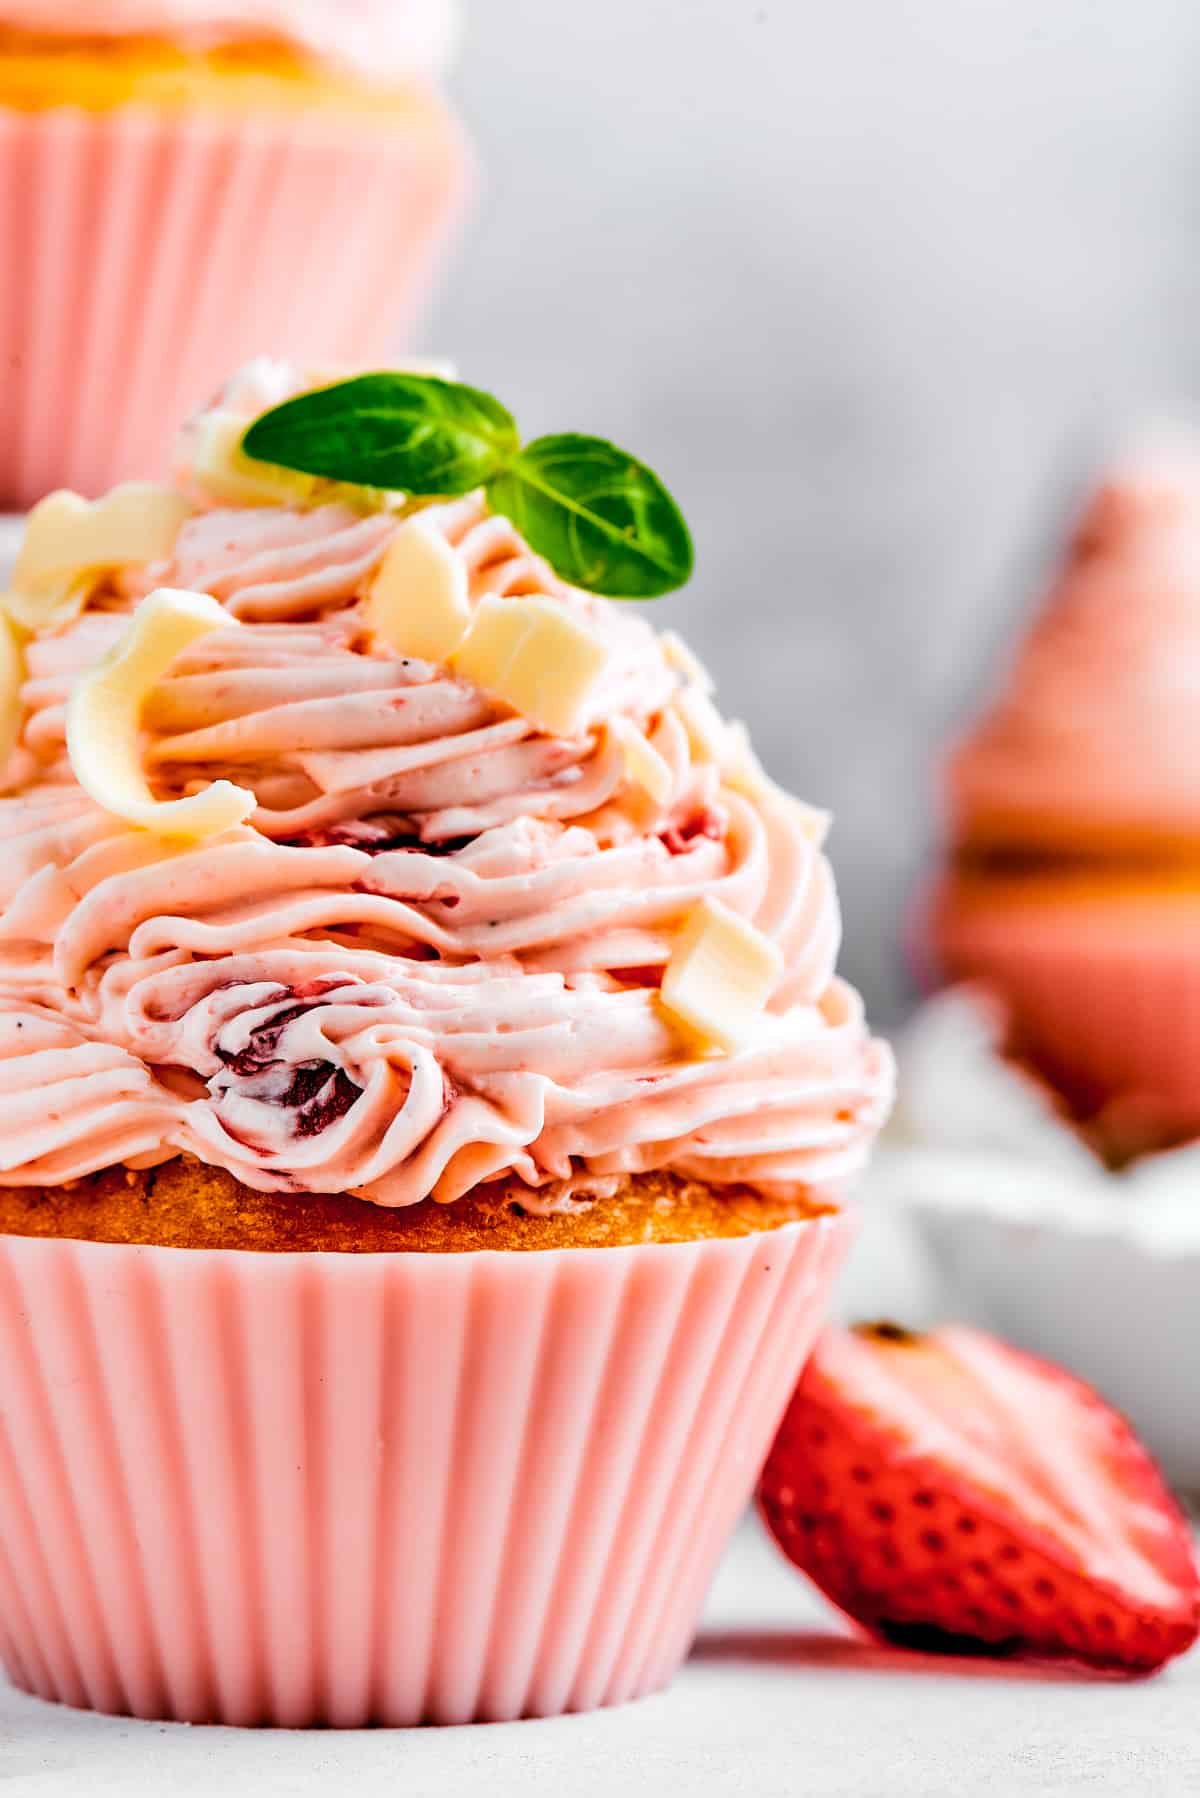 A strawberry cupcake garnished with mint and strawaberry.